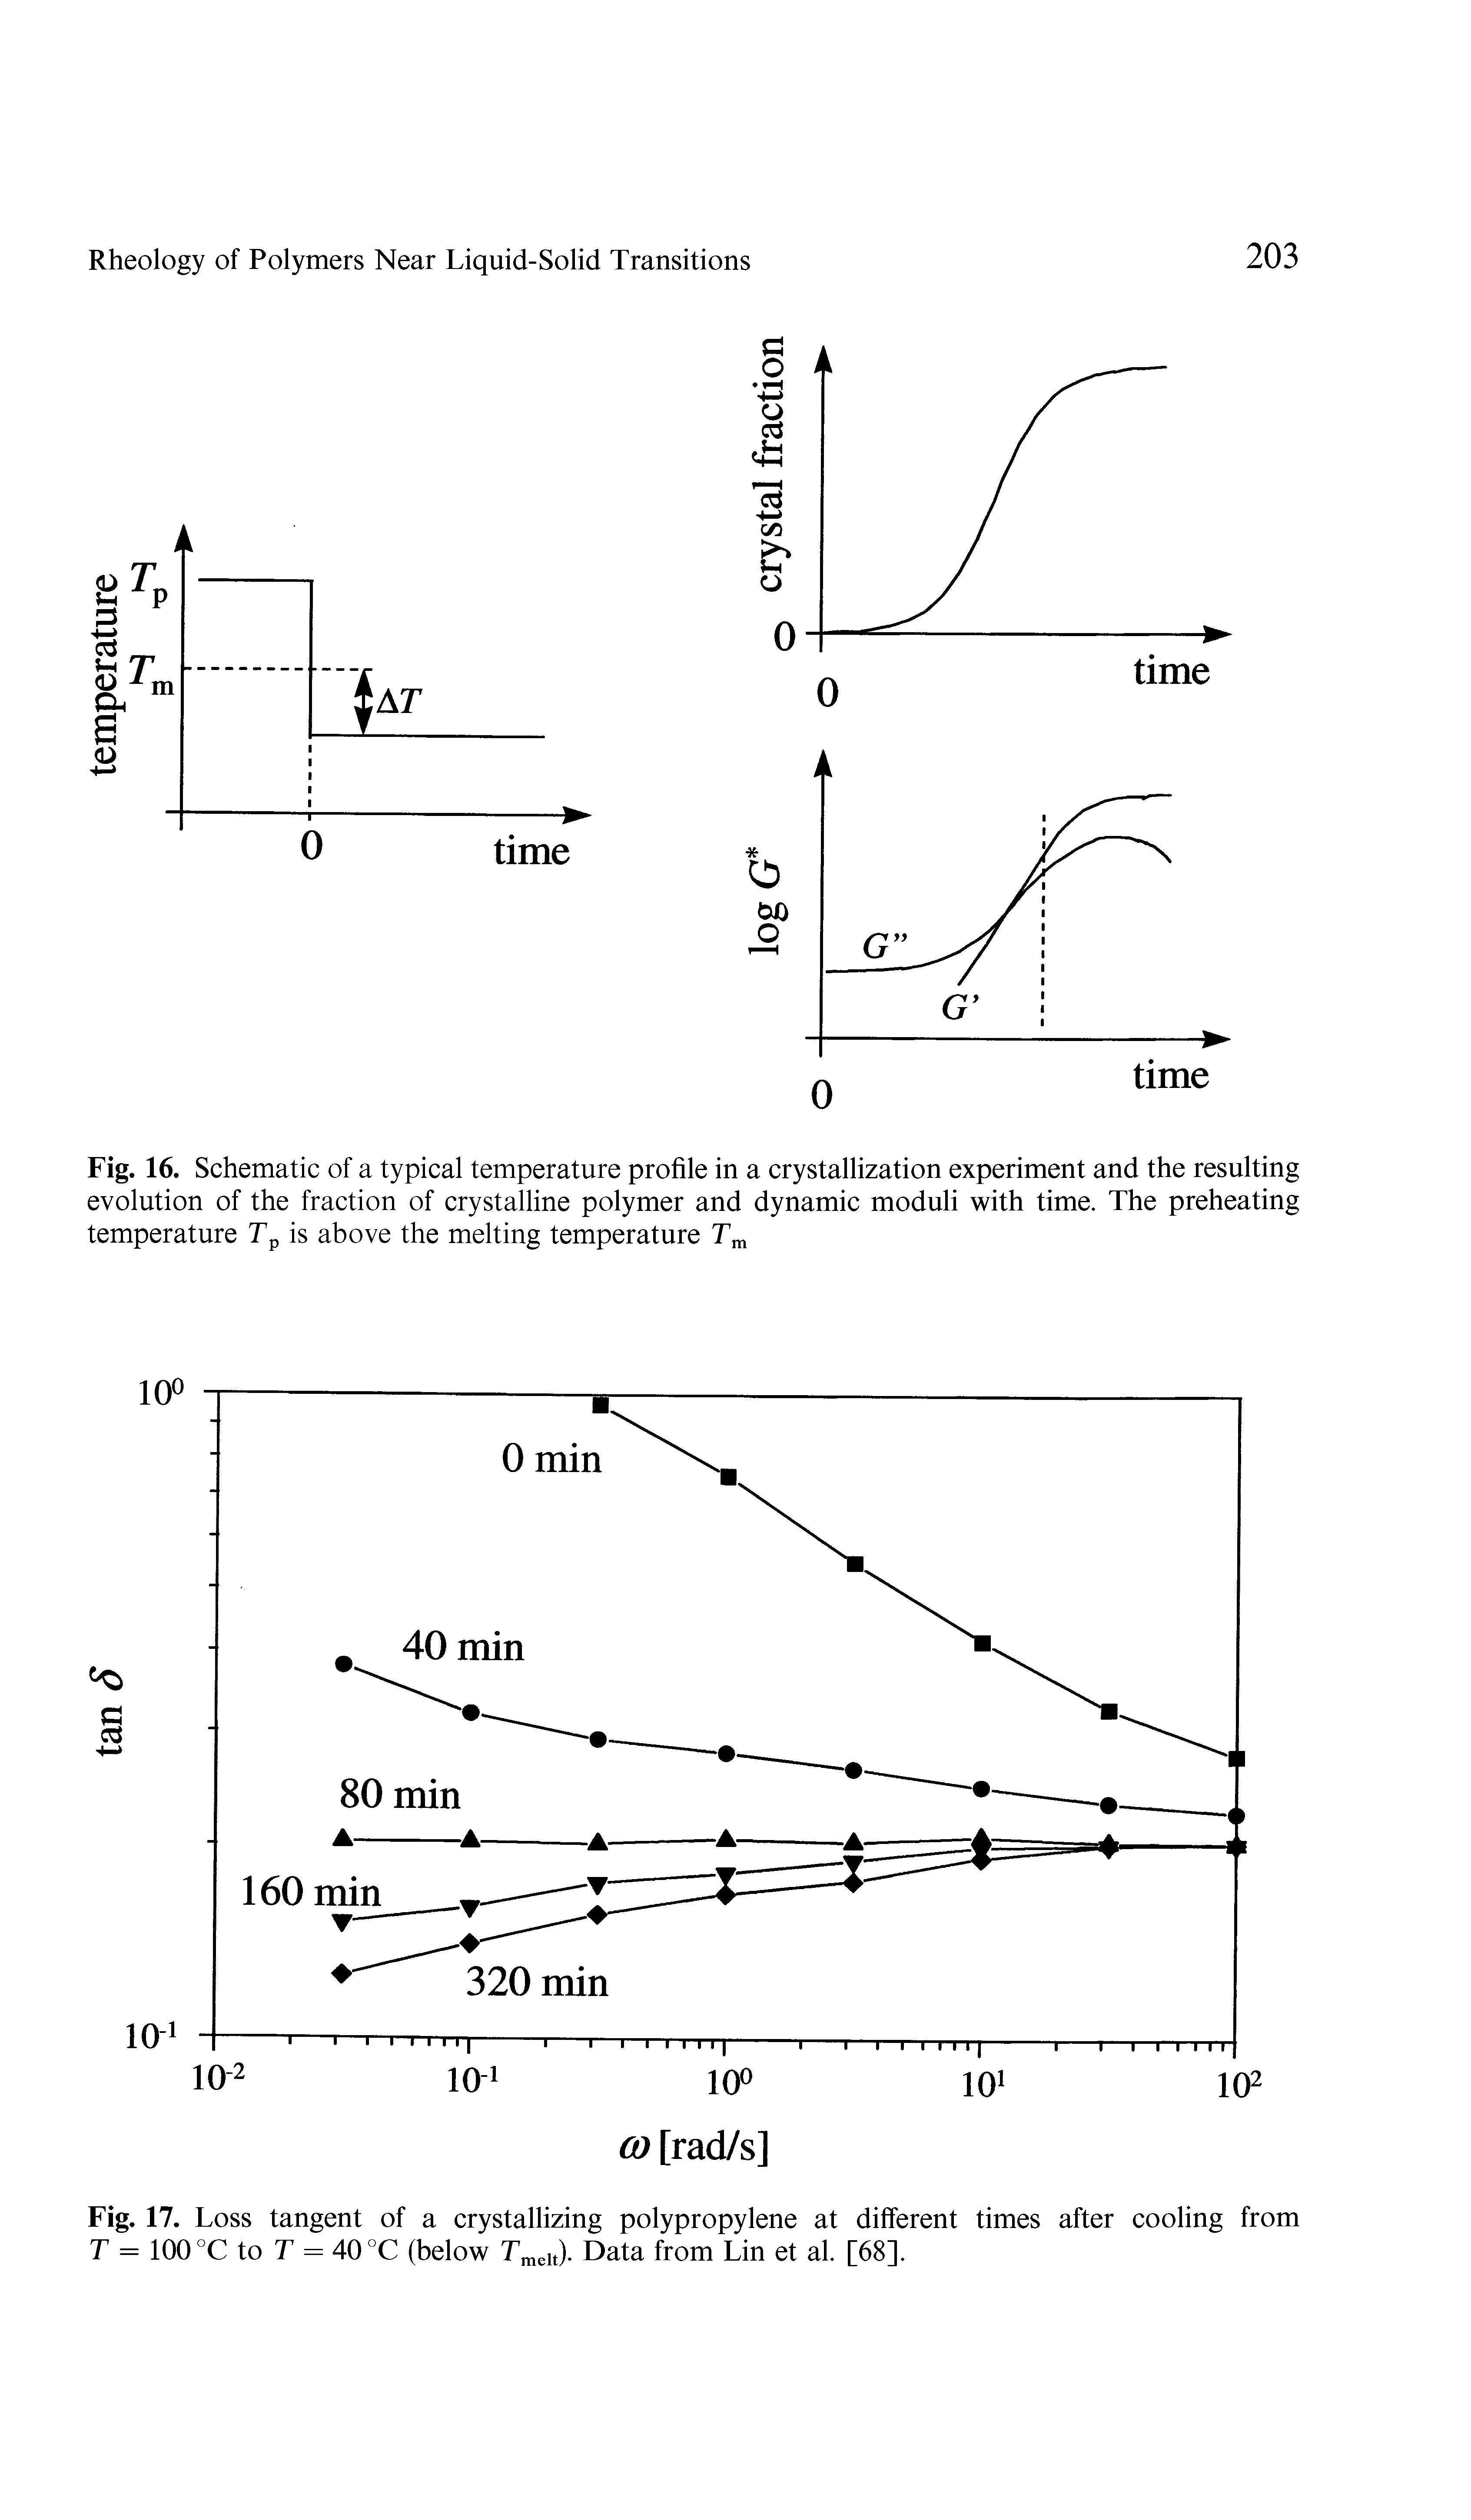 Fig. 17. Loss tangent of a crystallizing polypropylene at different times after cooling from T = 100 °C to T = 40 °C (below Tmelt). Data from Lin et al. [68].